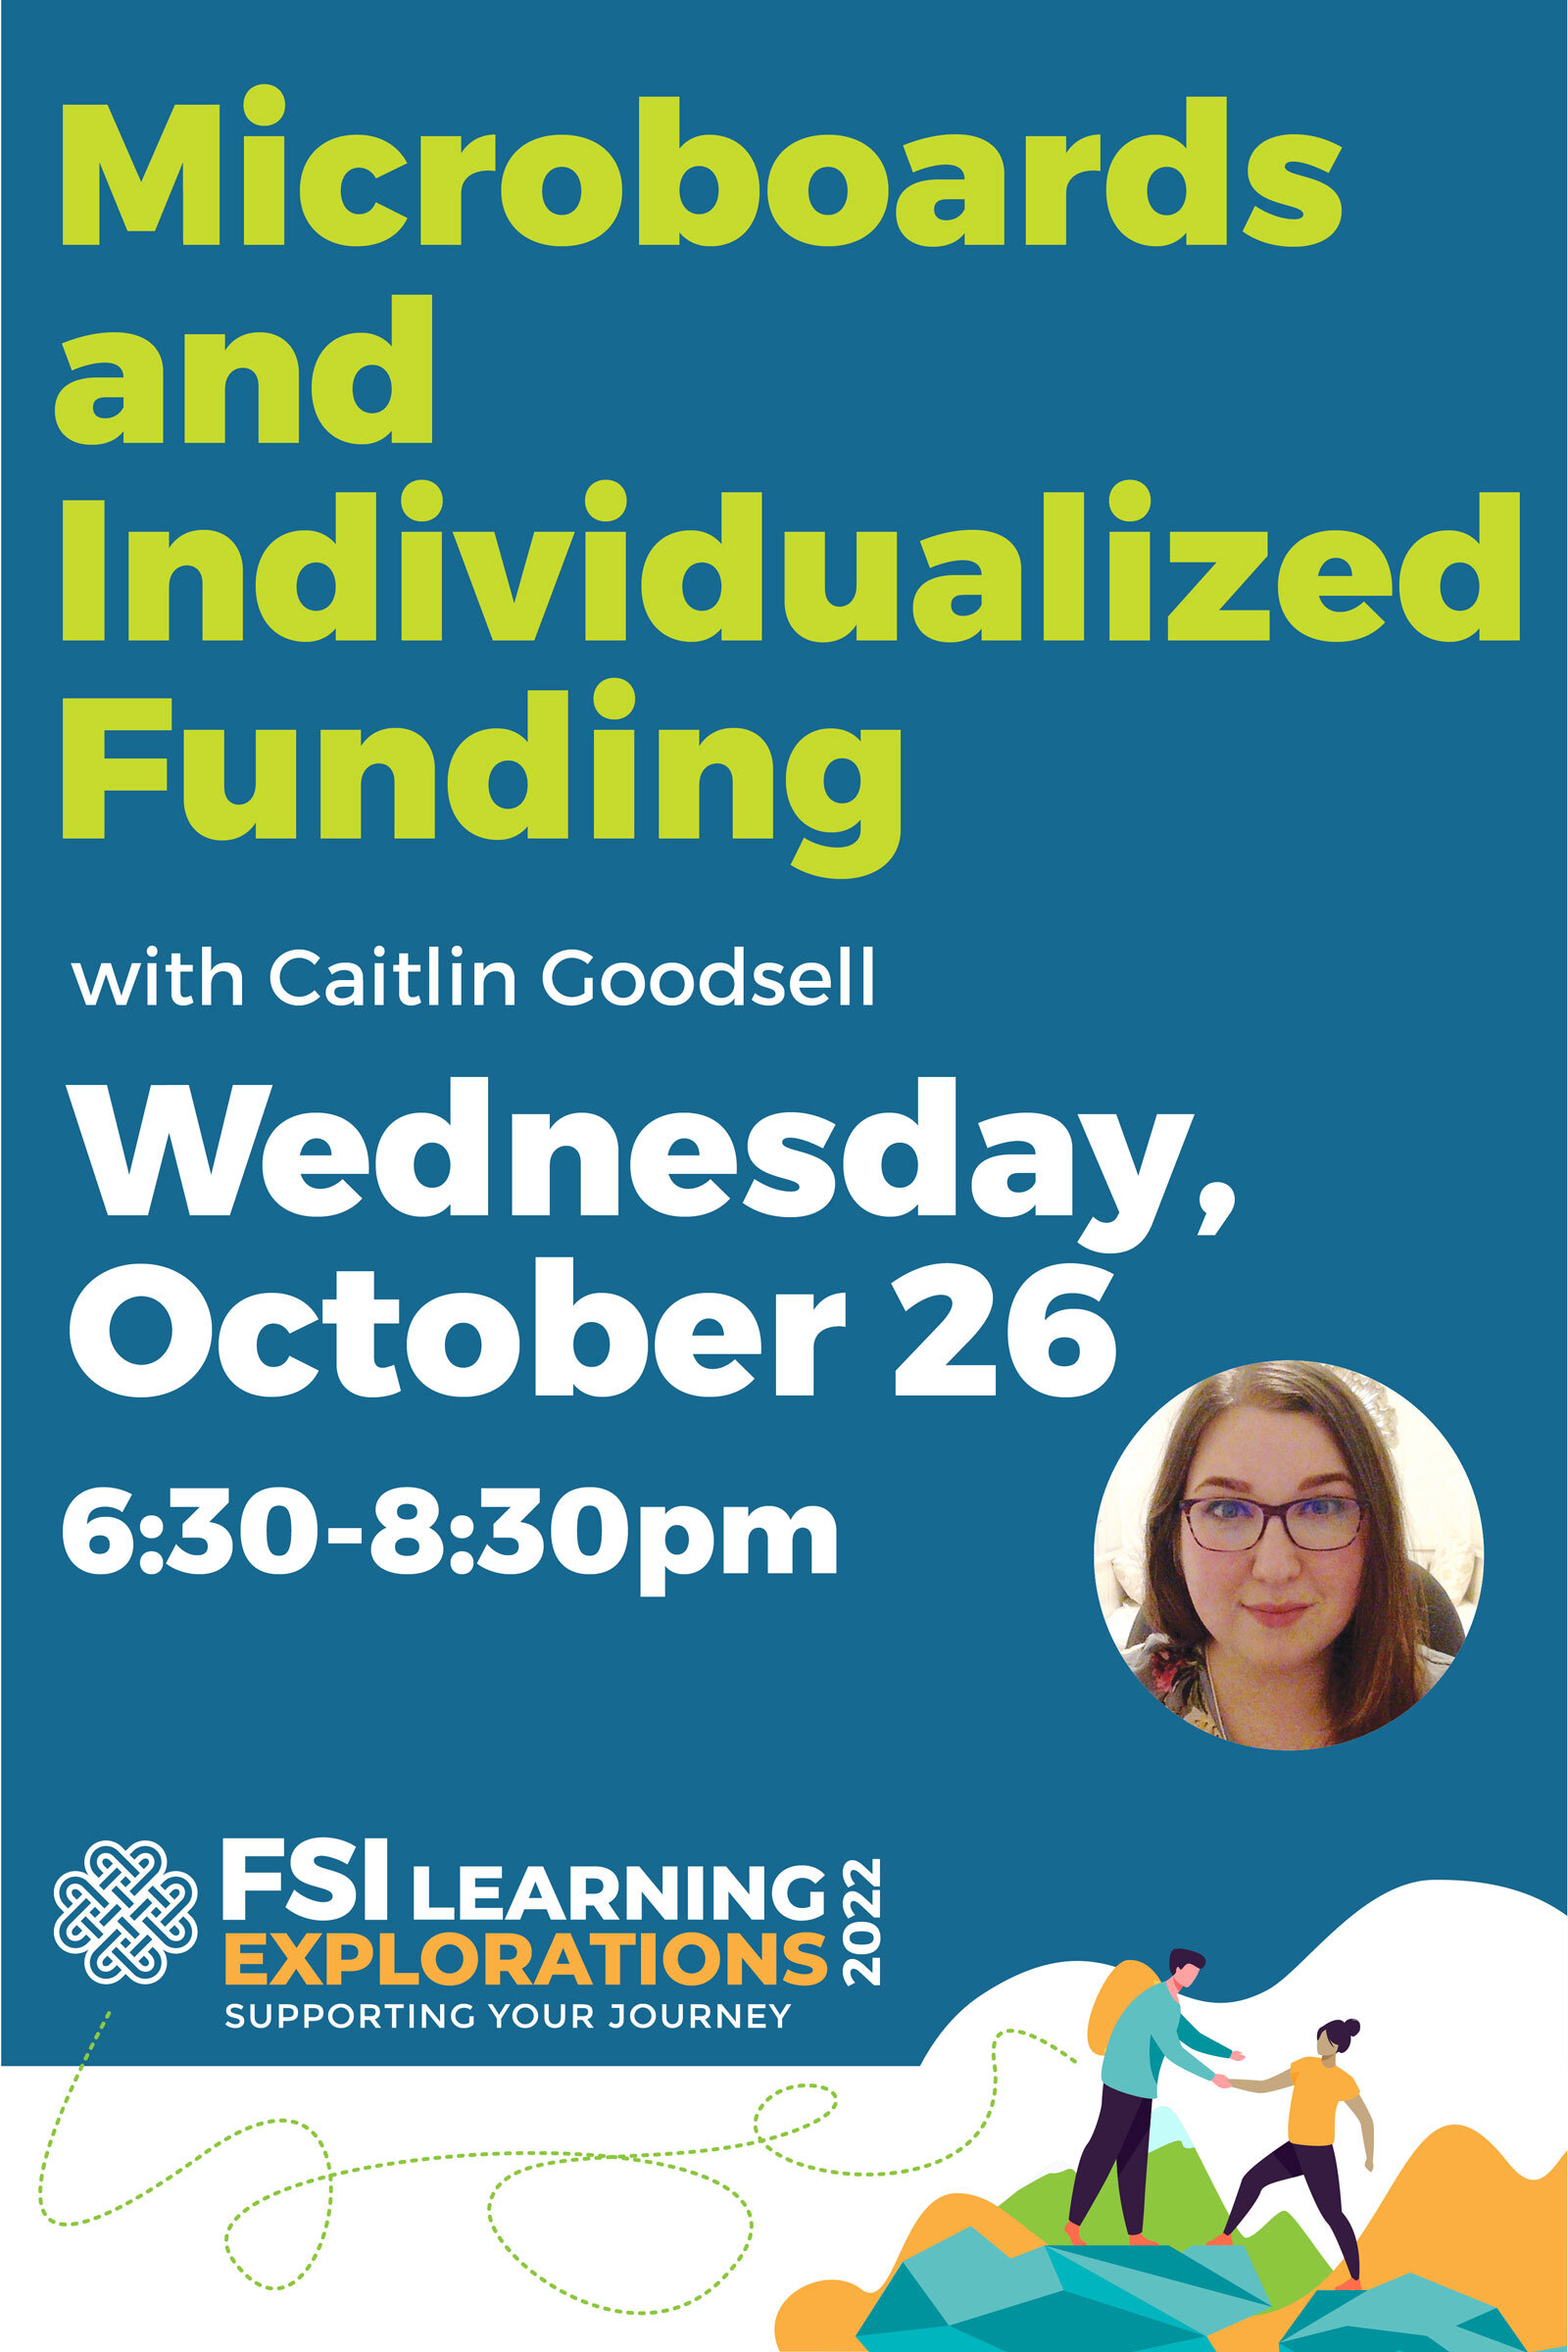 FSI Learning Explorations - Microboards and Individualized Funding